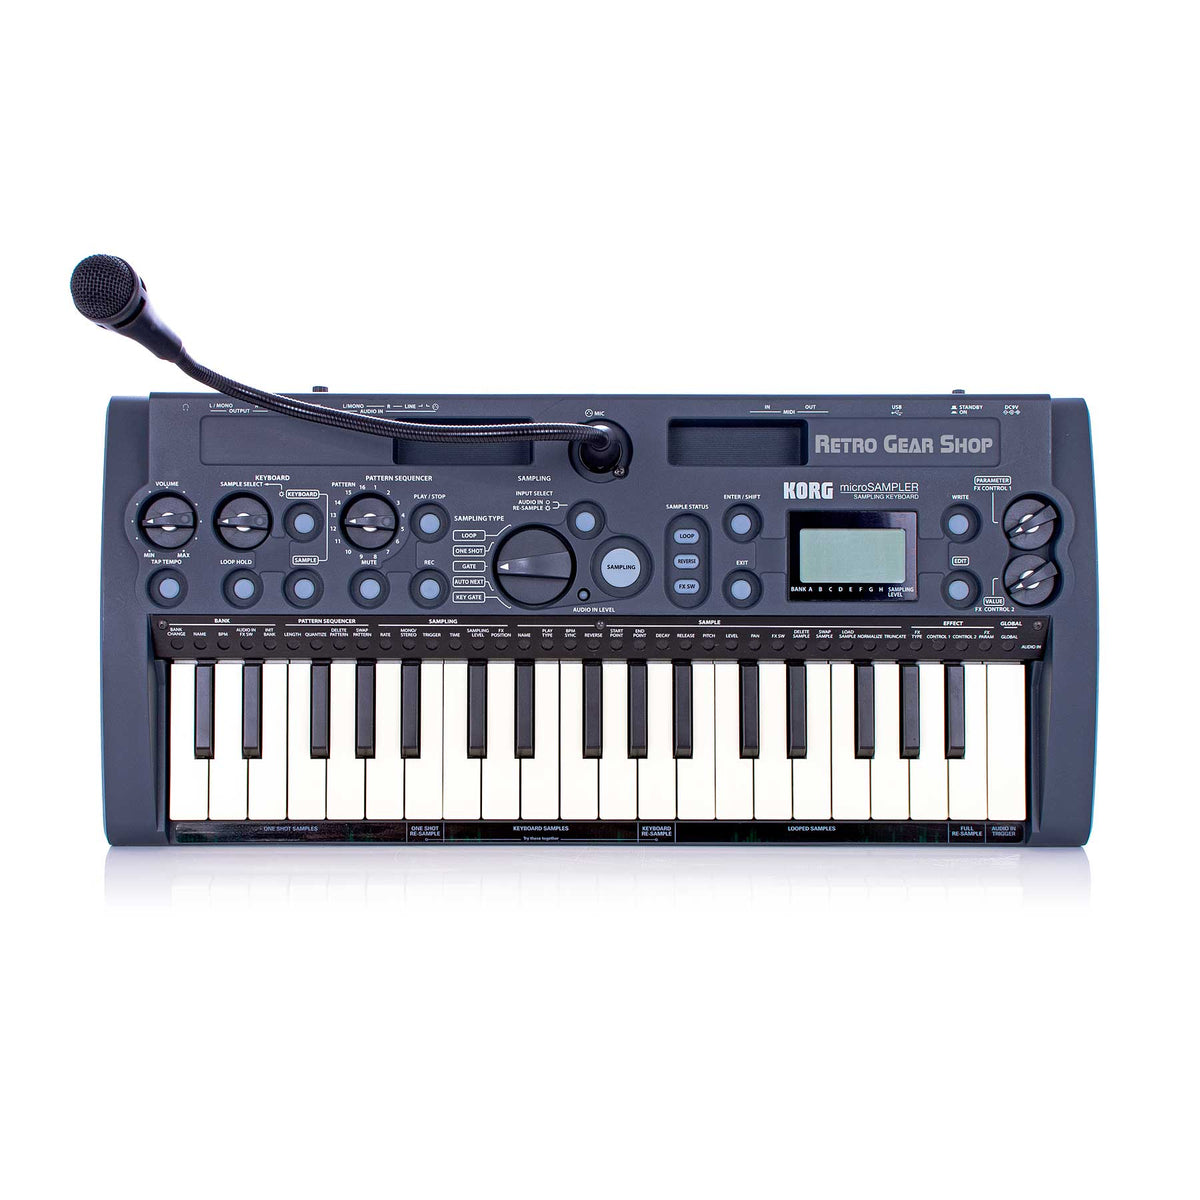 Korg MS1 MicroSampler Synthesizer Synth Keyboard – Retro Gear 